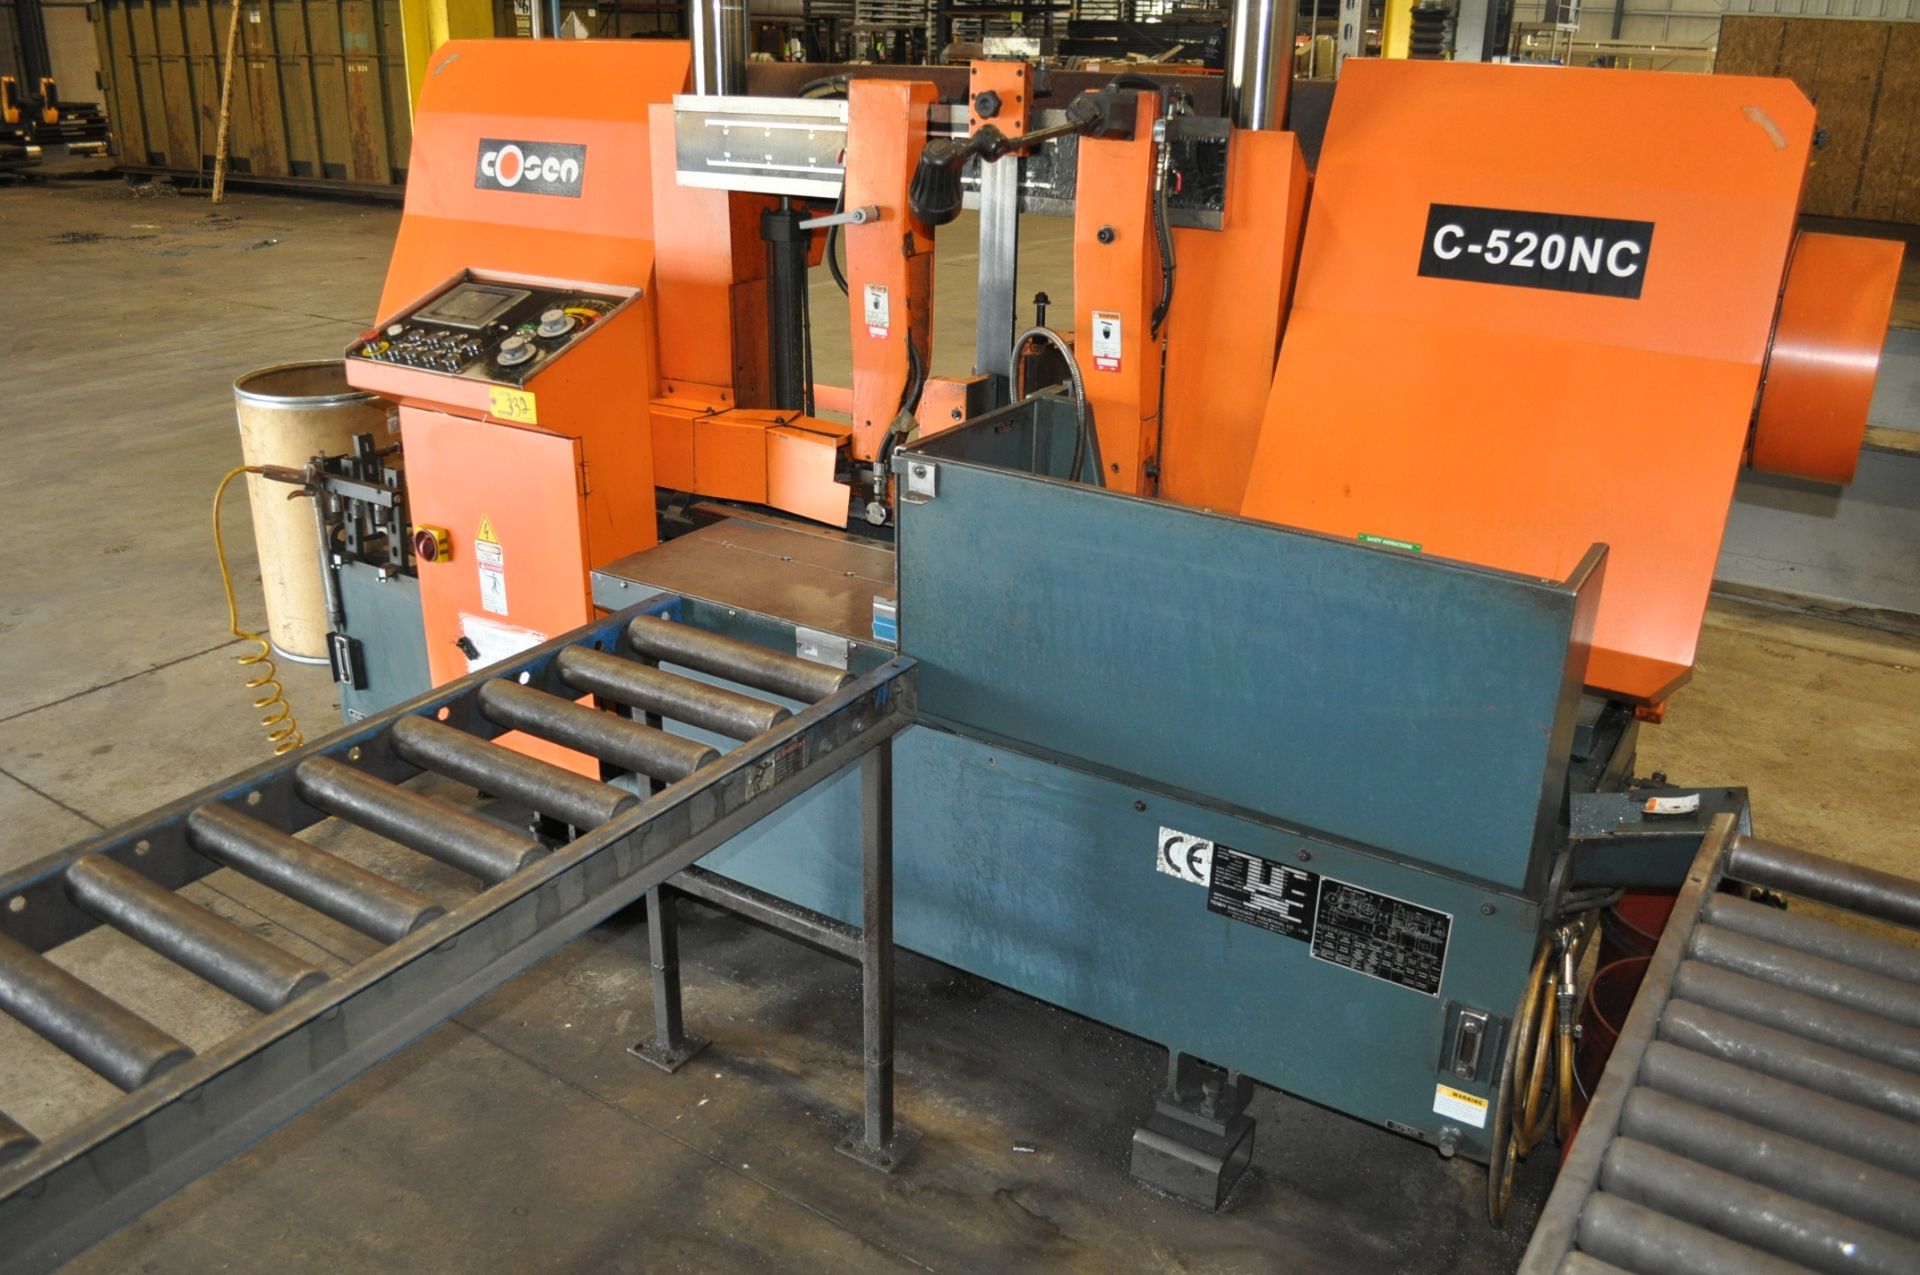 COSEN MDL. C-520NC HYDRAULIC VERTICAL BANDSAW, WITH 520mm MAX SIZE BAR, 520mm X 520mm SQUARE, - Image 4 of 7